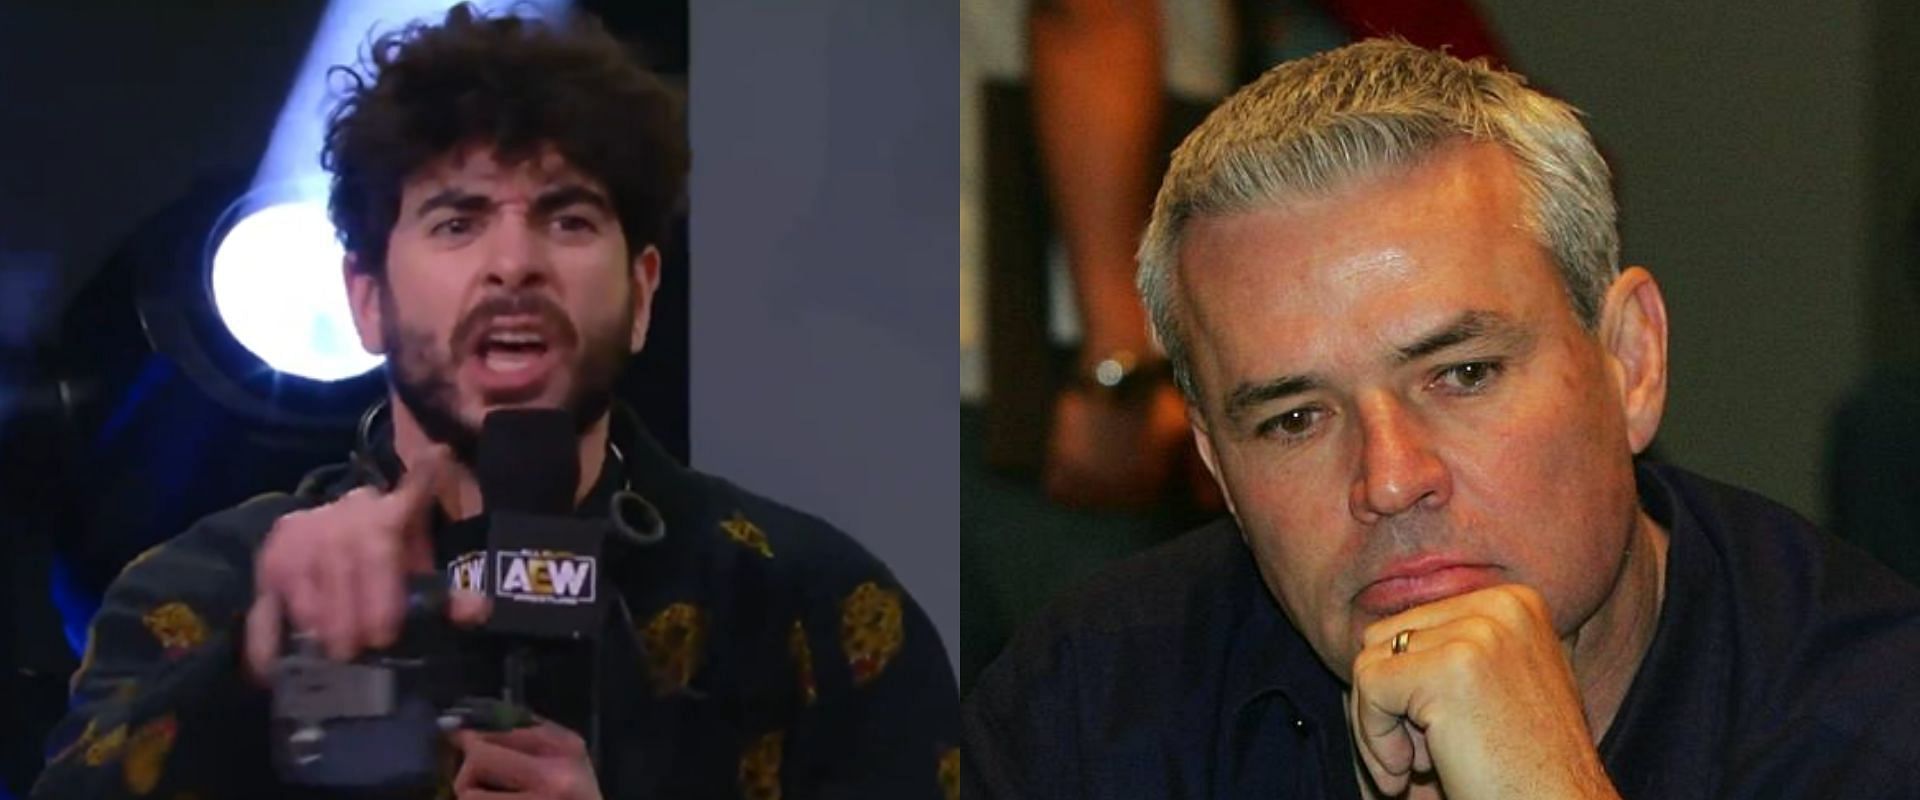 Tony Khan fired back at Eric Bischoff.